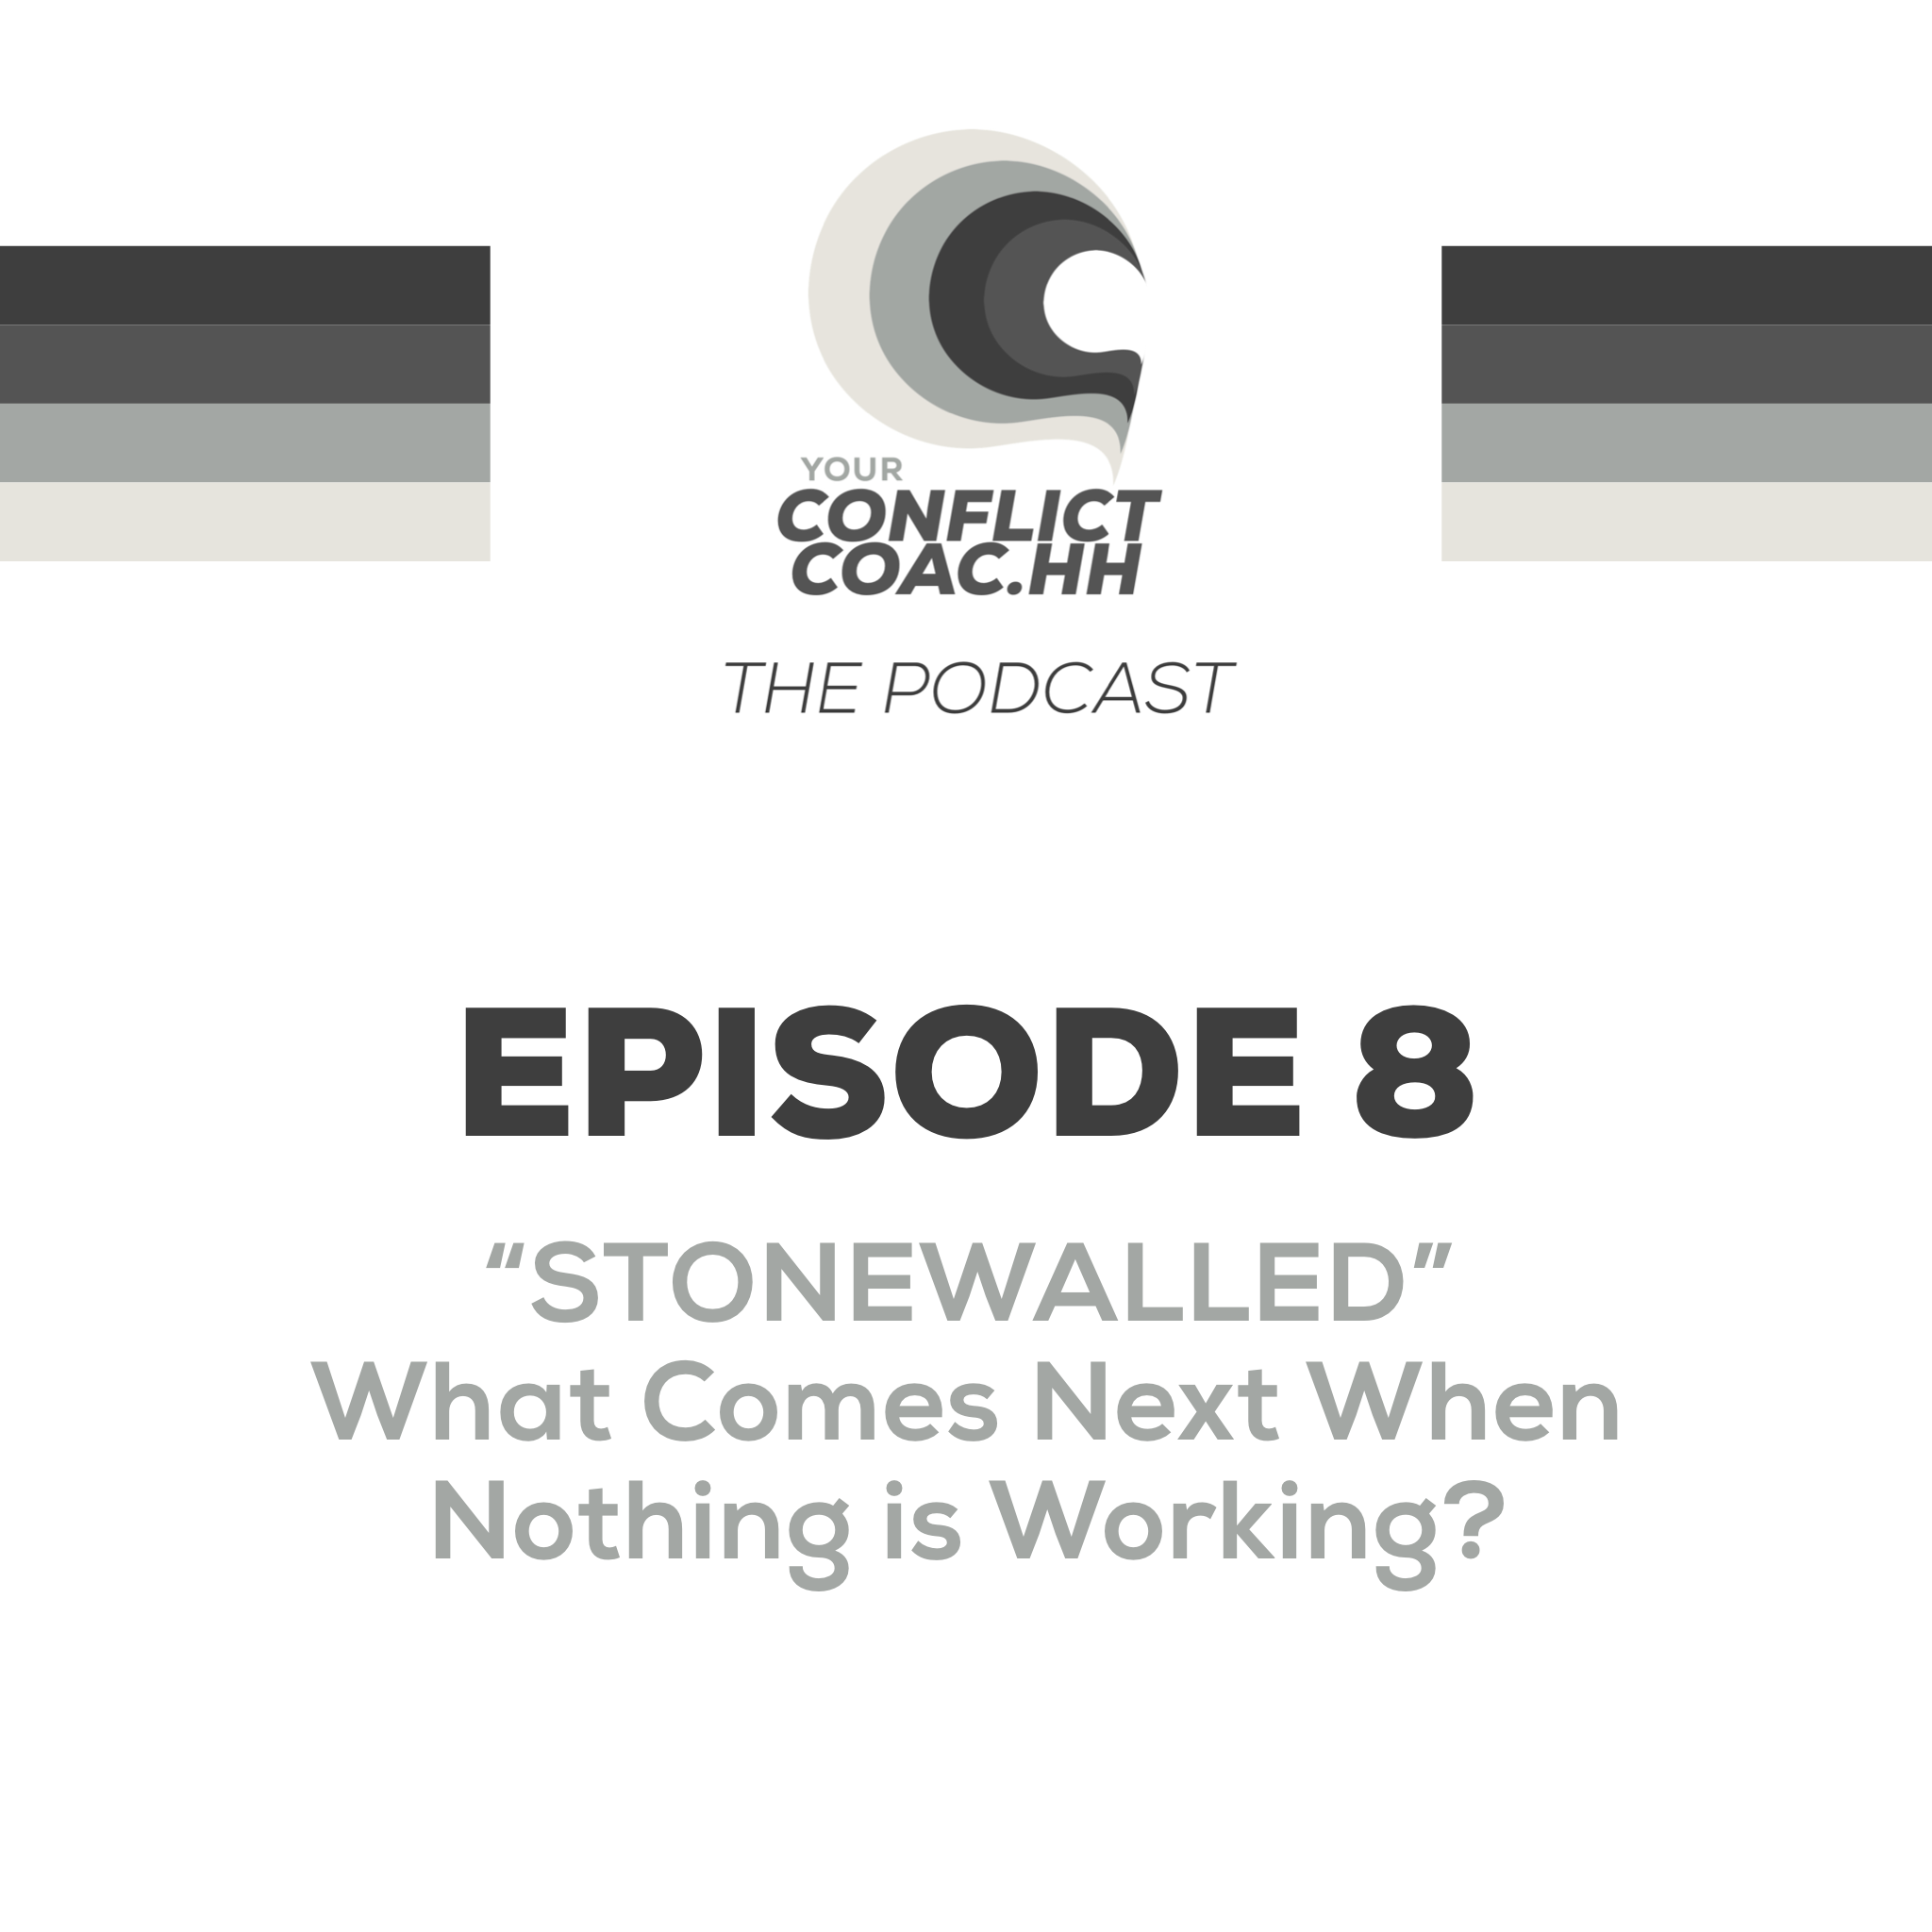 STONEWALLED - What Comes Next When Nothing is Working?